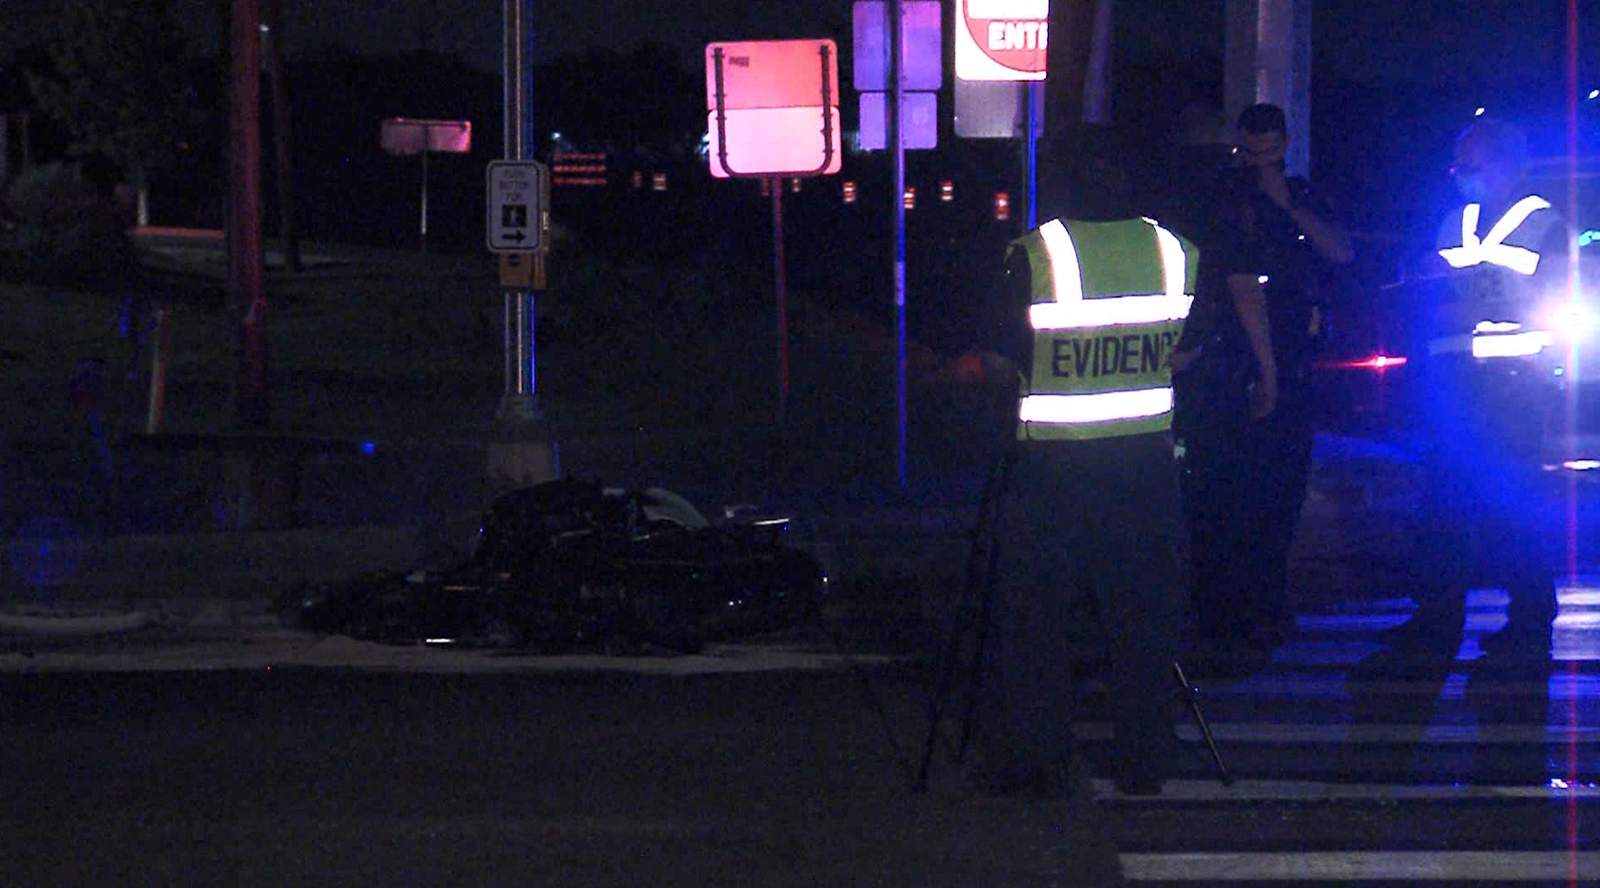 Motorcyclist injured in crash with vehicle on South Side, police say